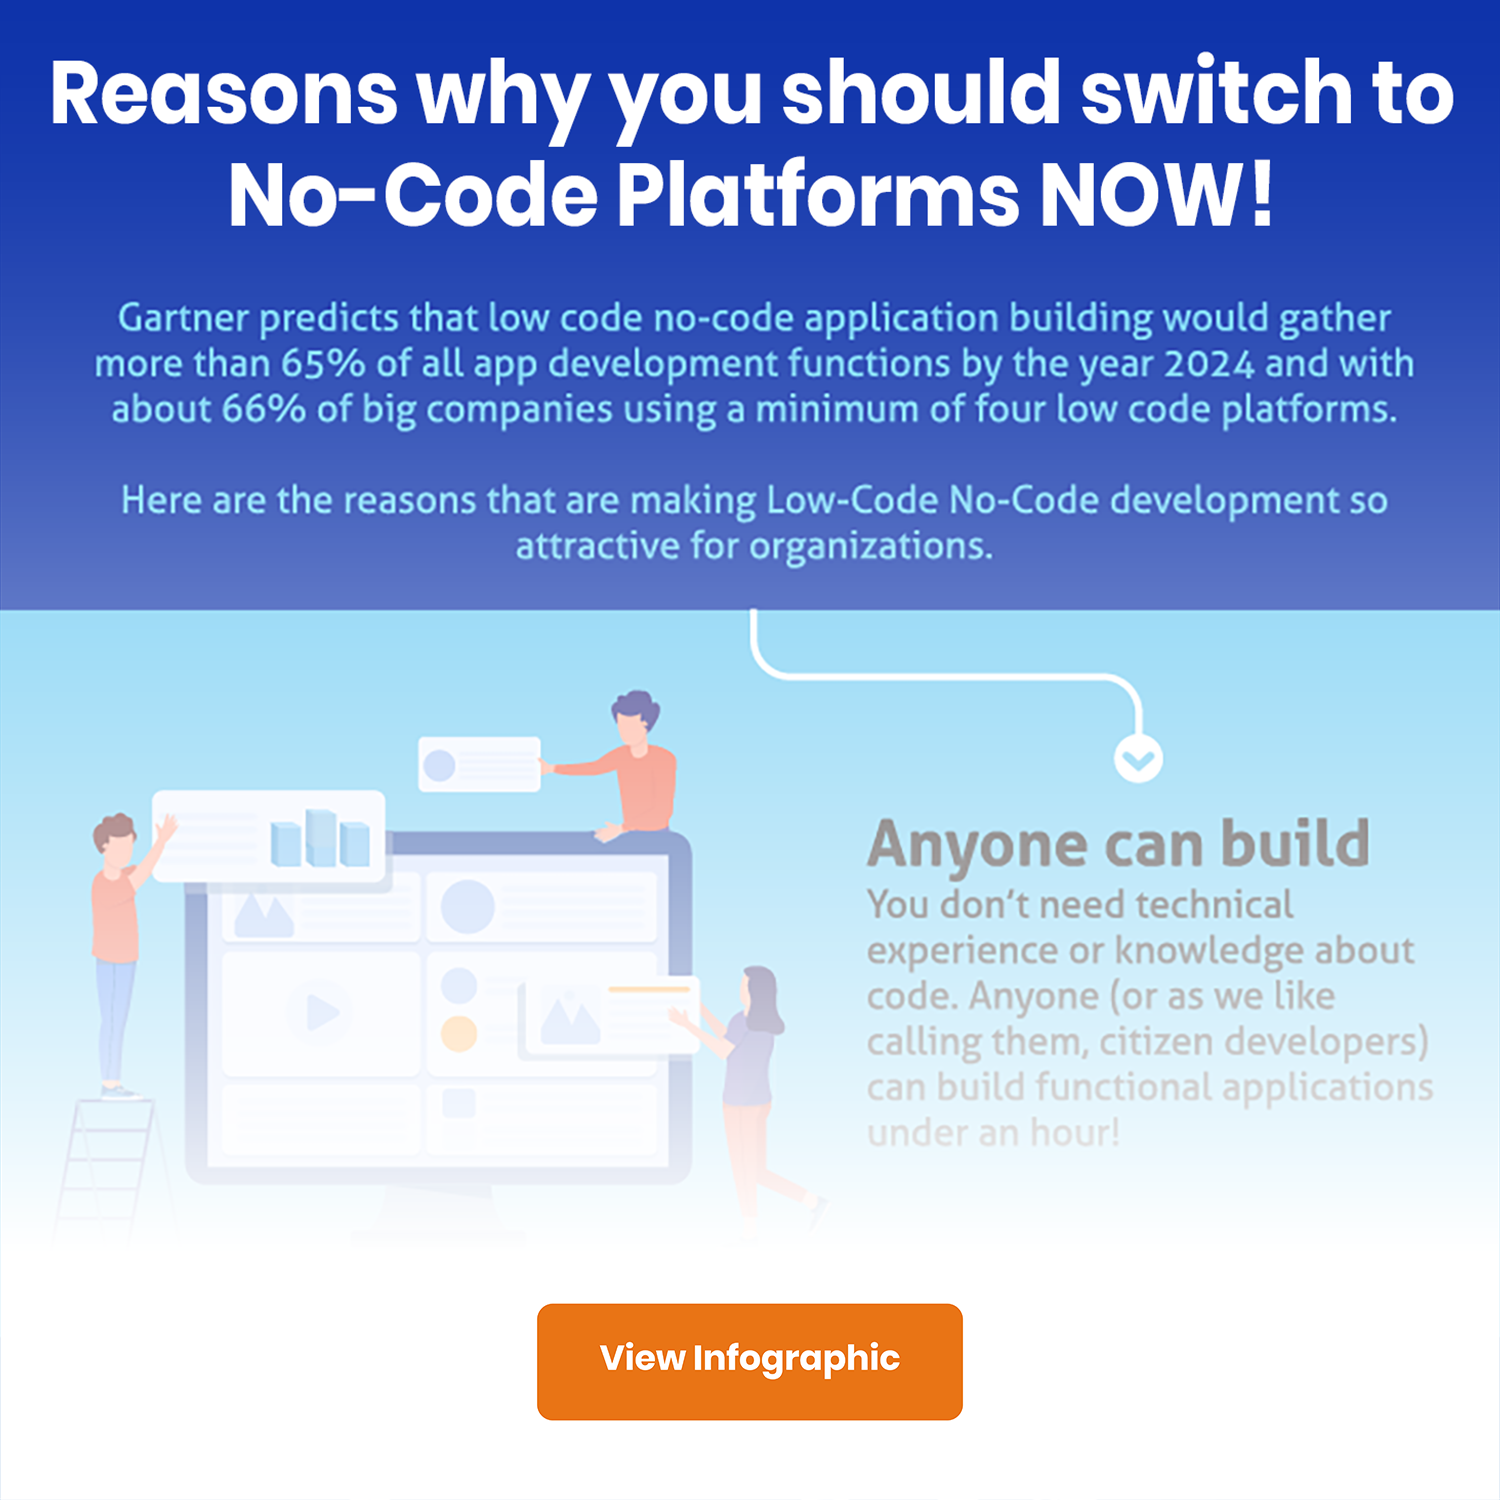 Reasons why you should switch to No-Code Platforms infographic
